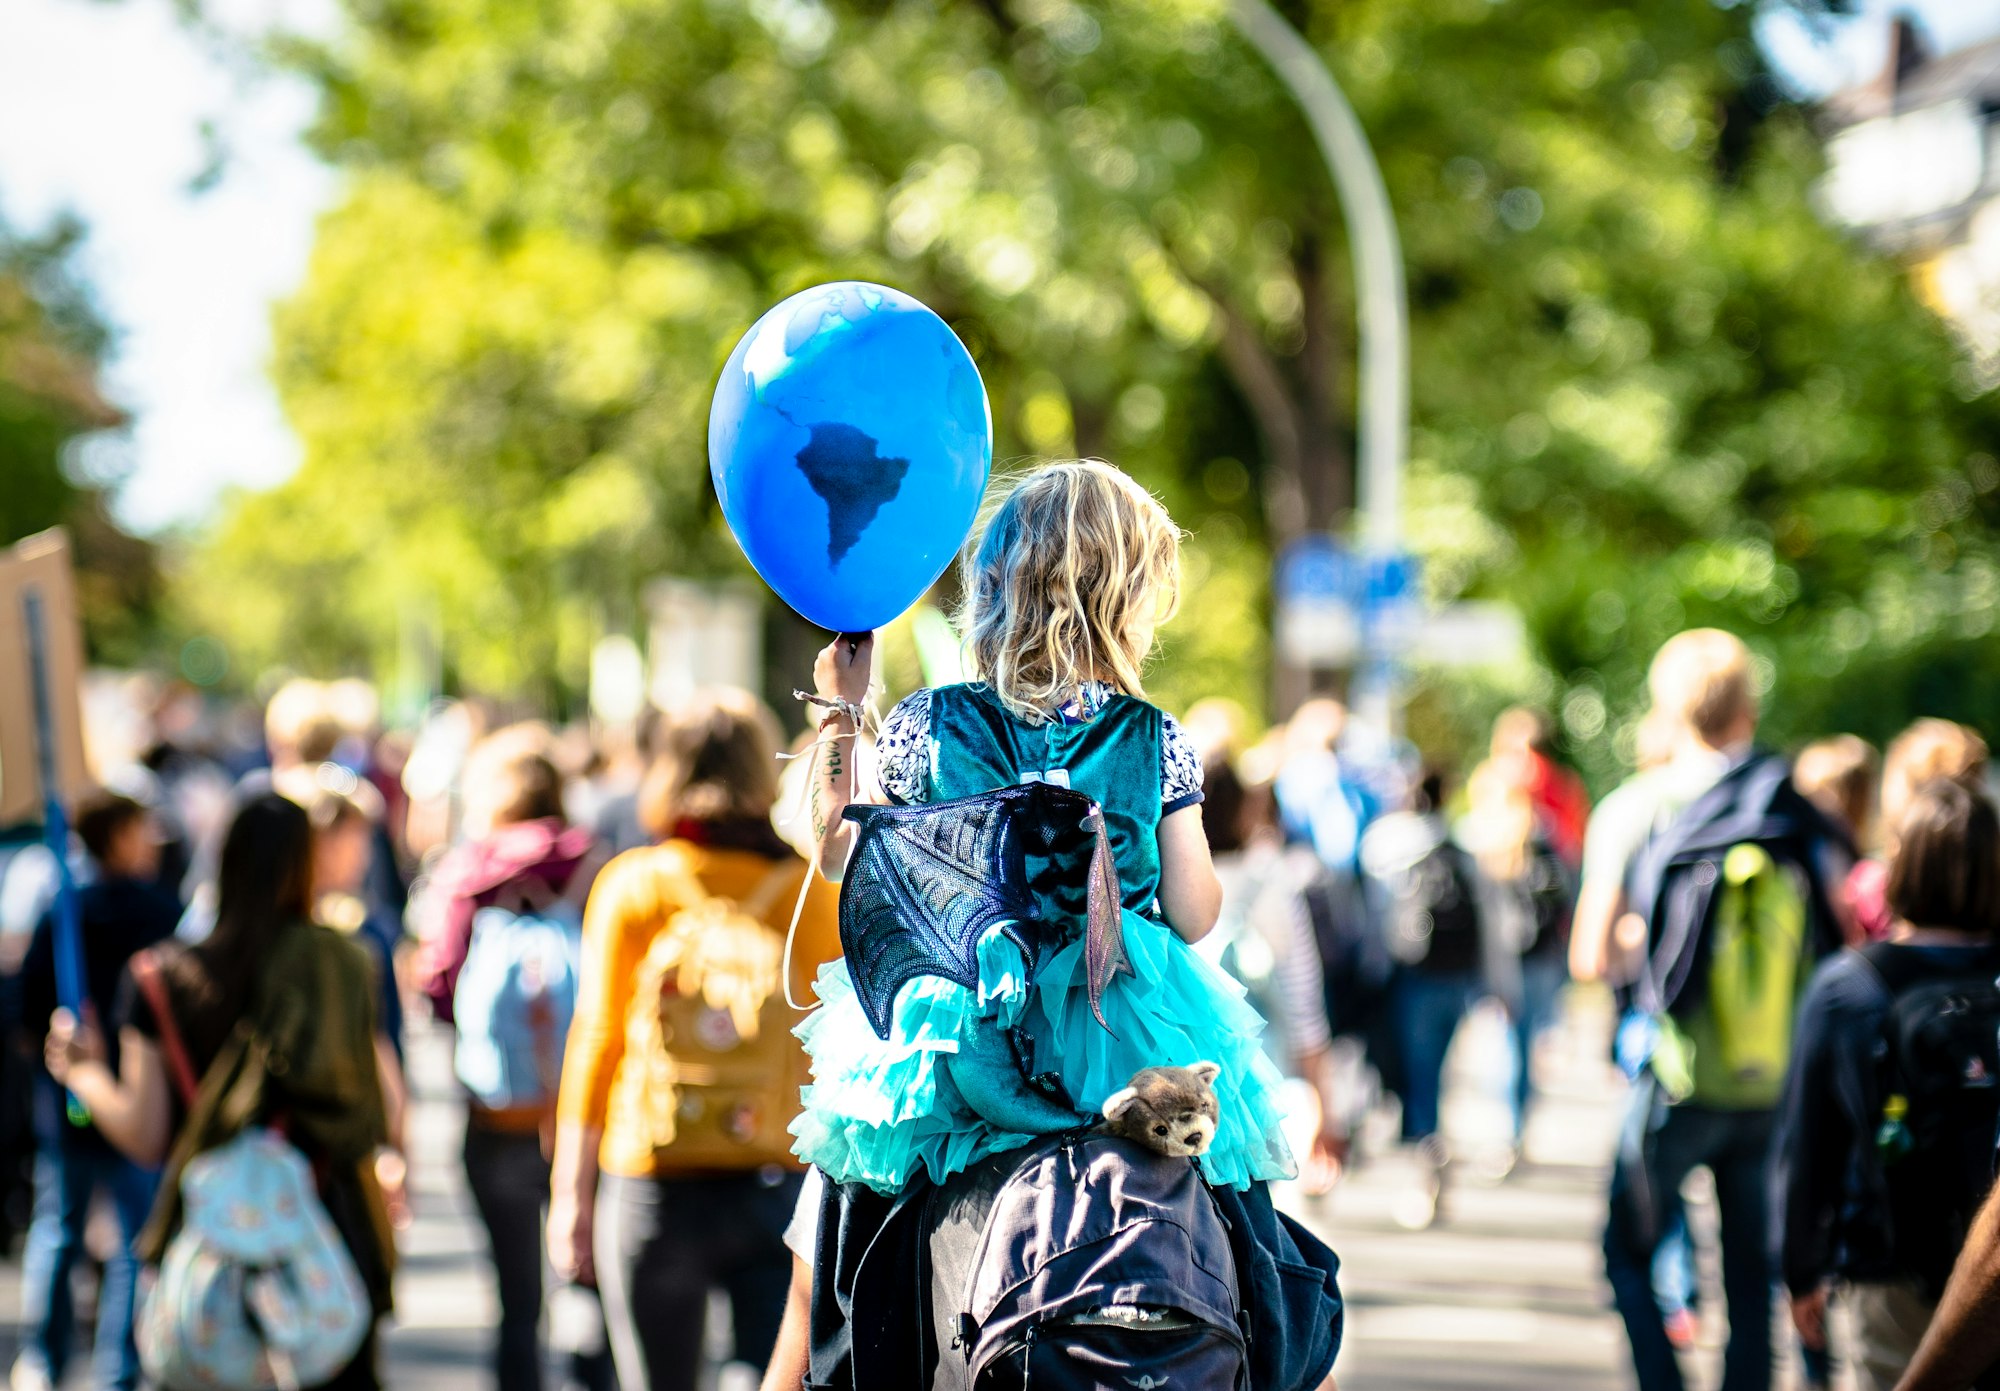 Just a girl protesting for her rights :) 
Fridays For Future, 20.09.2019 in Bonn, Germany